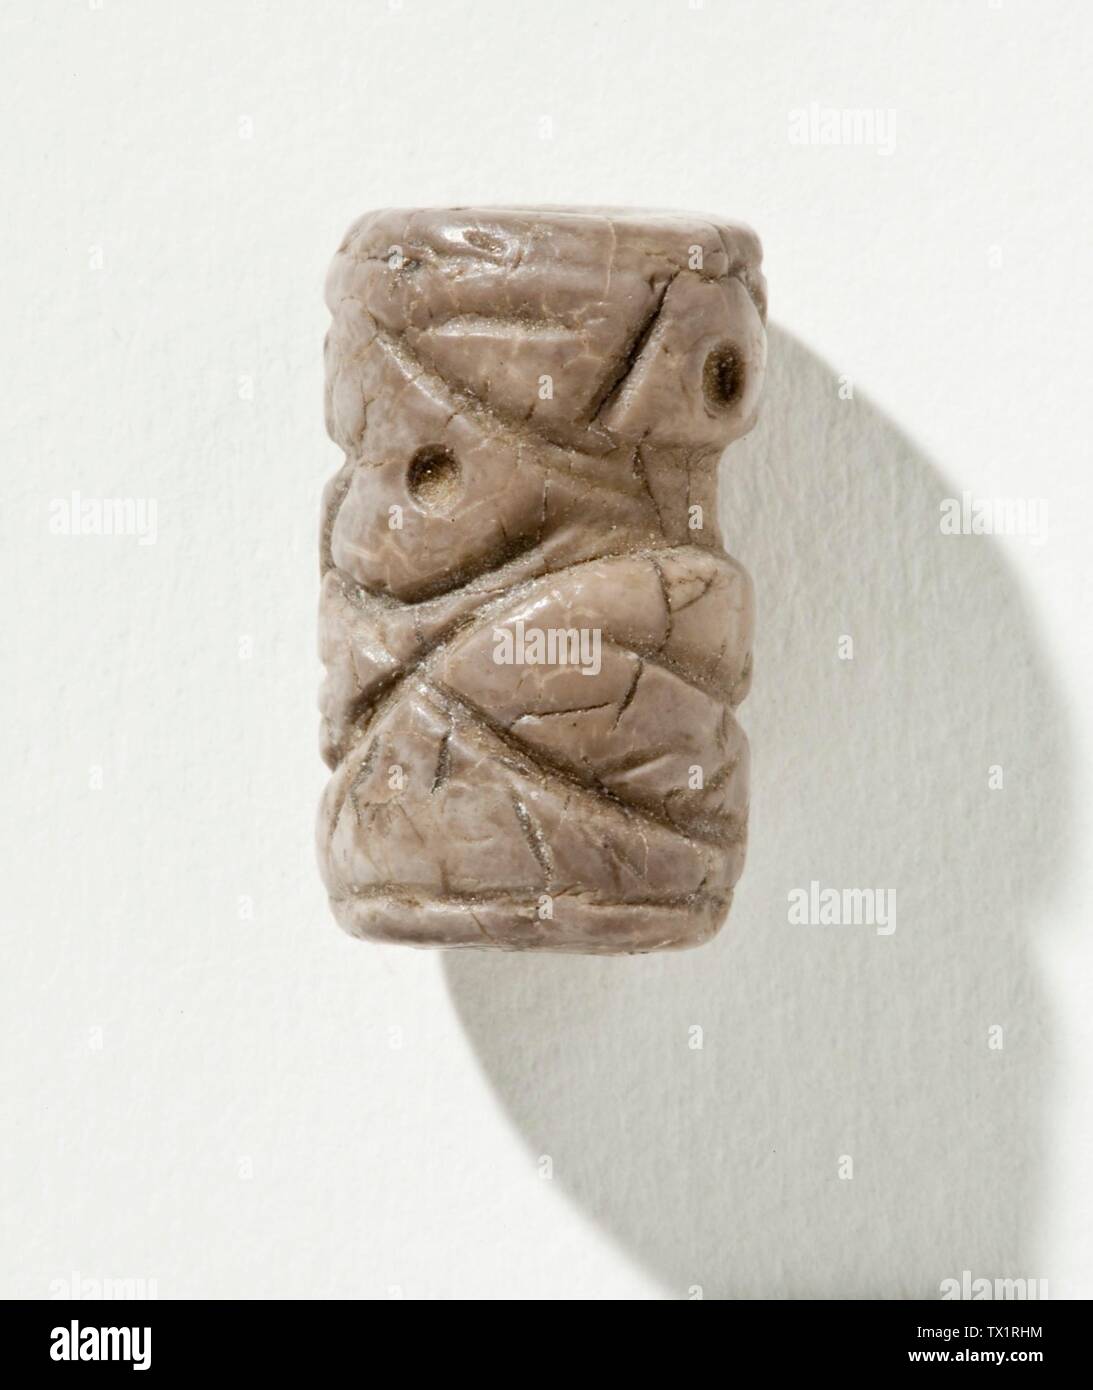 Cylinder Seal; Iran, Mesopotamia or Syria, Transitional period, about 2900-2800 B.C.  Tools and Equipment; seals Gray marble Height:  11/16 in. (1.66 cm); Diameter:  7/16 in. (1 cm) Gift of Nasli M. Heeramaneck (M.76.174.331) Art of the Ancient Near East; between circa 2900 and circa 2800 date QS:P571,+2500-00-00T00:00:00Z/6,P1319,+2900-00-00T00:00:00Z/9,P1326,+2800-00-00T00:00:00Z/9,P1480,Q5727902 B.C.; Stock Photo